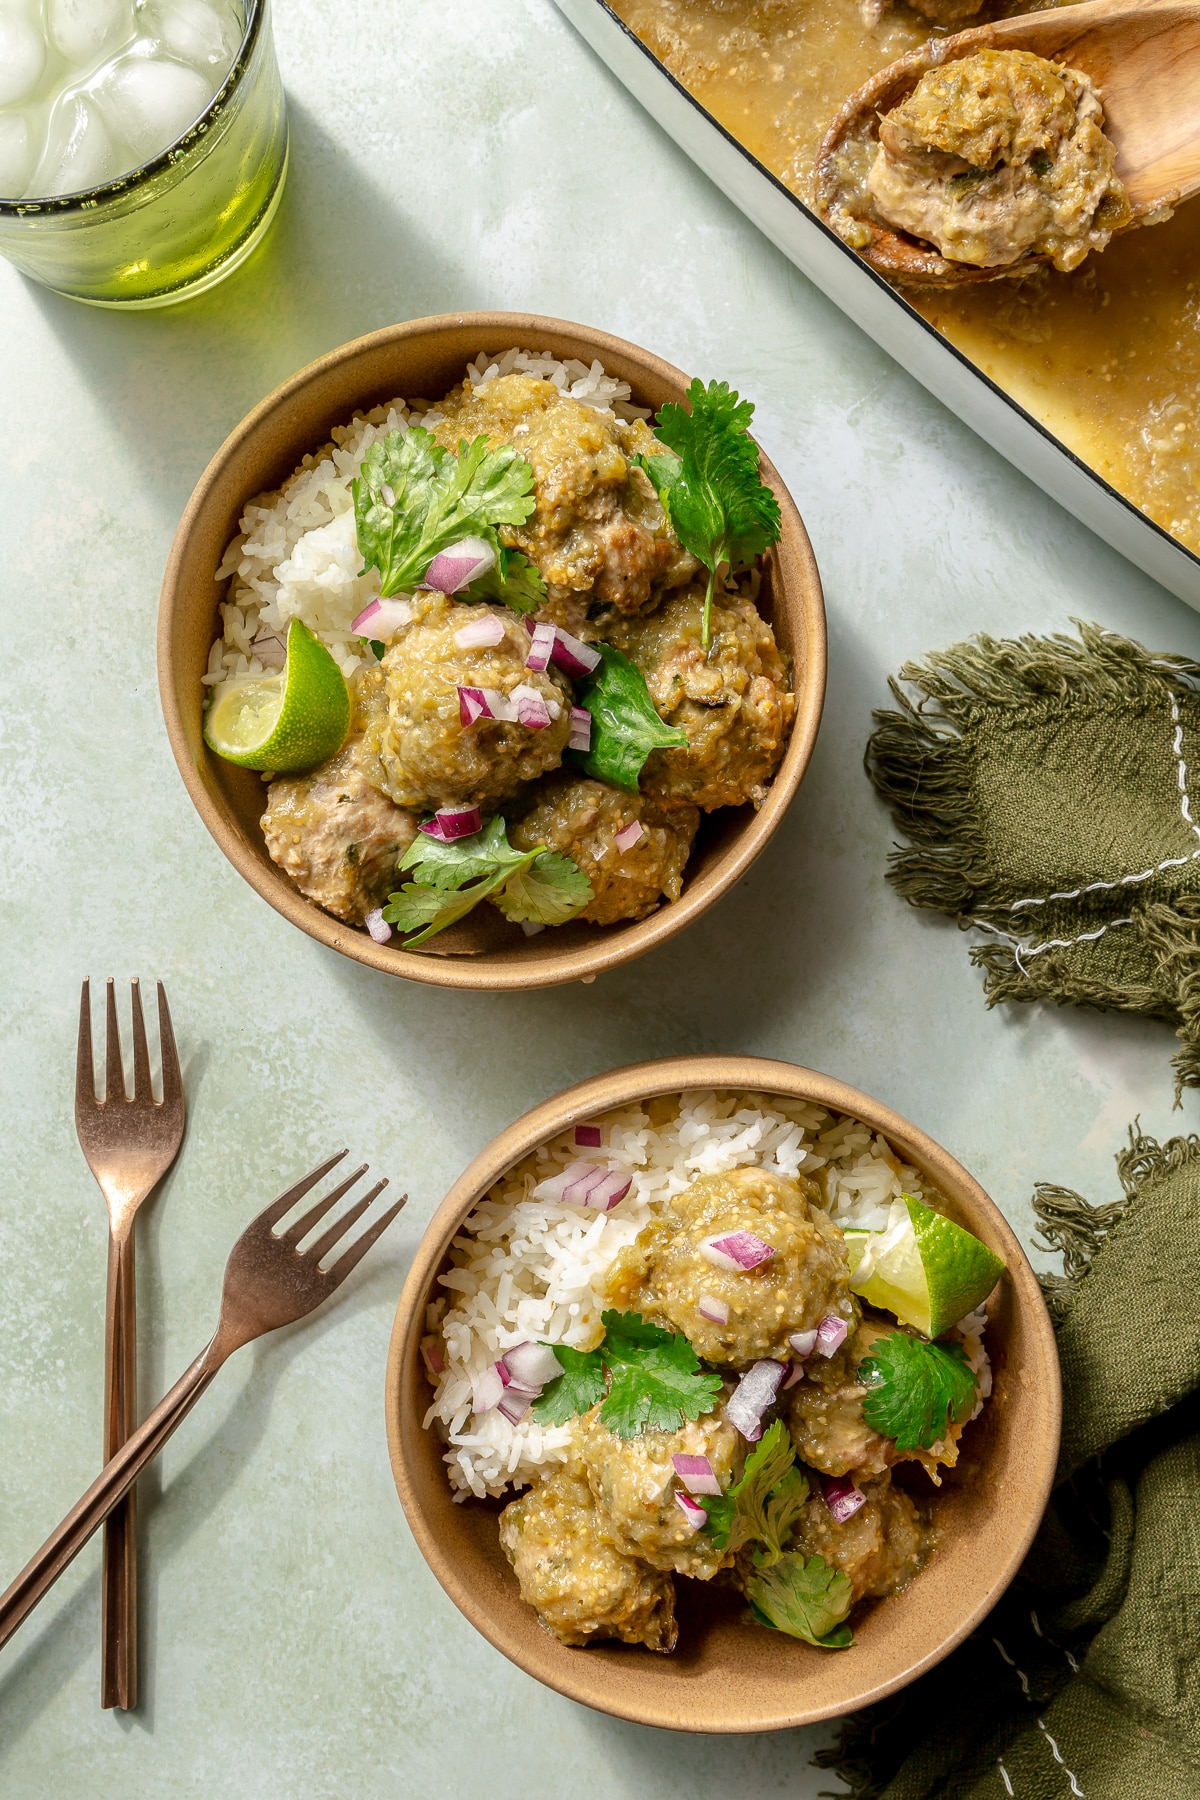 Enchilada verde turkey meatballs have been served in two bowls over white rice. Diced onions and cilantro have been placed on top for garnish. Two copper forks sit to the side.